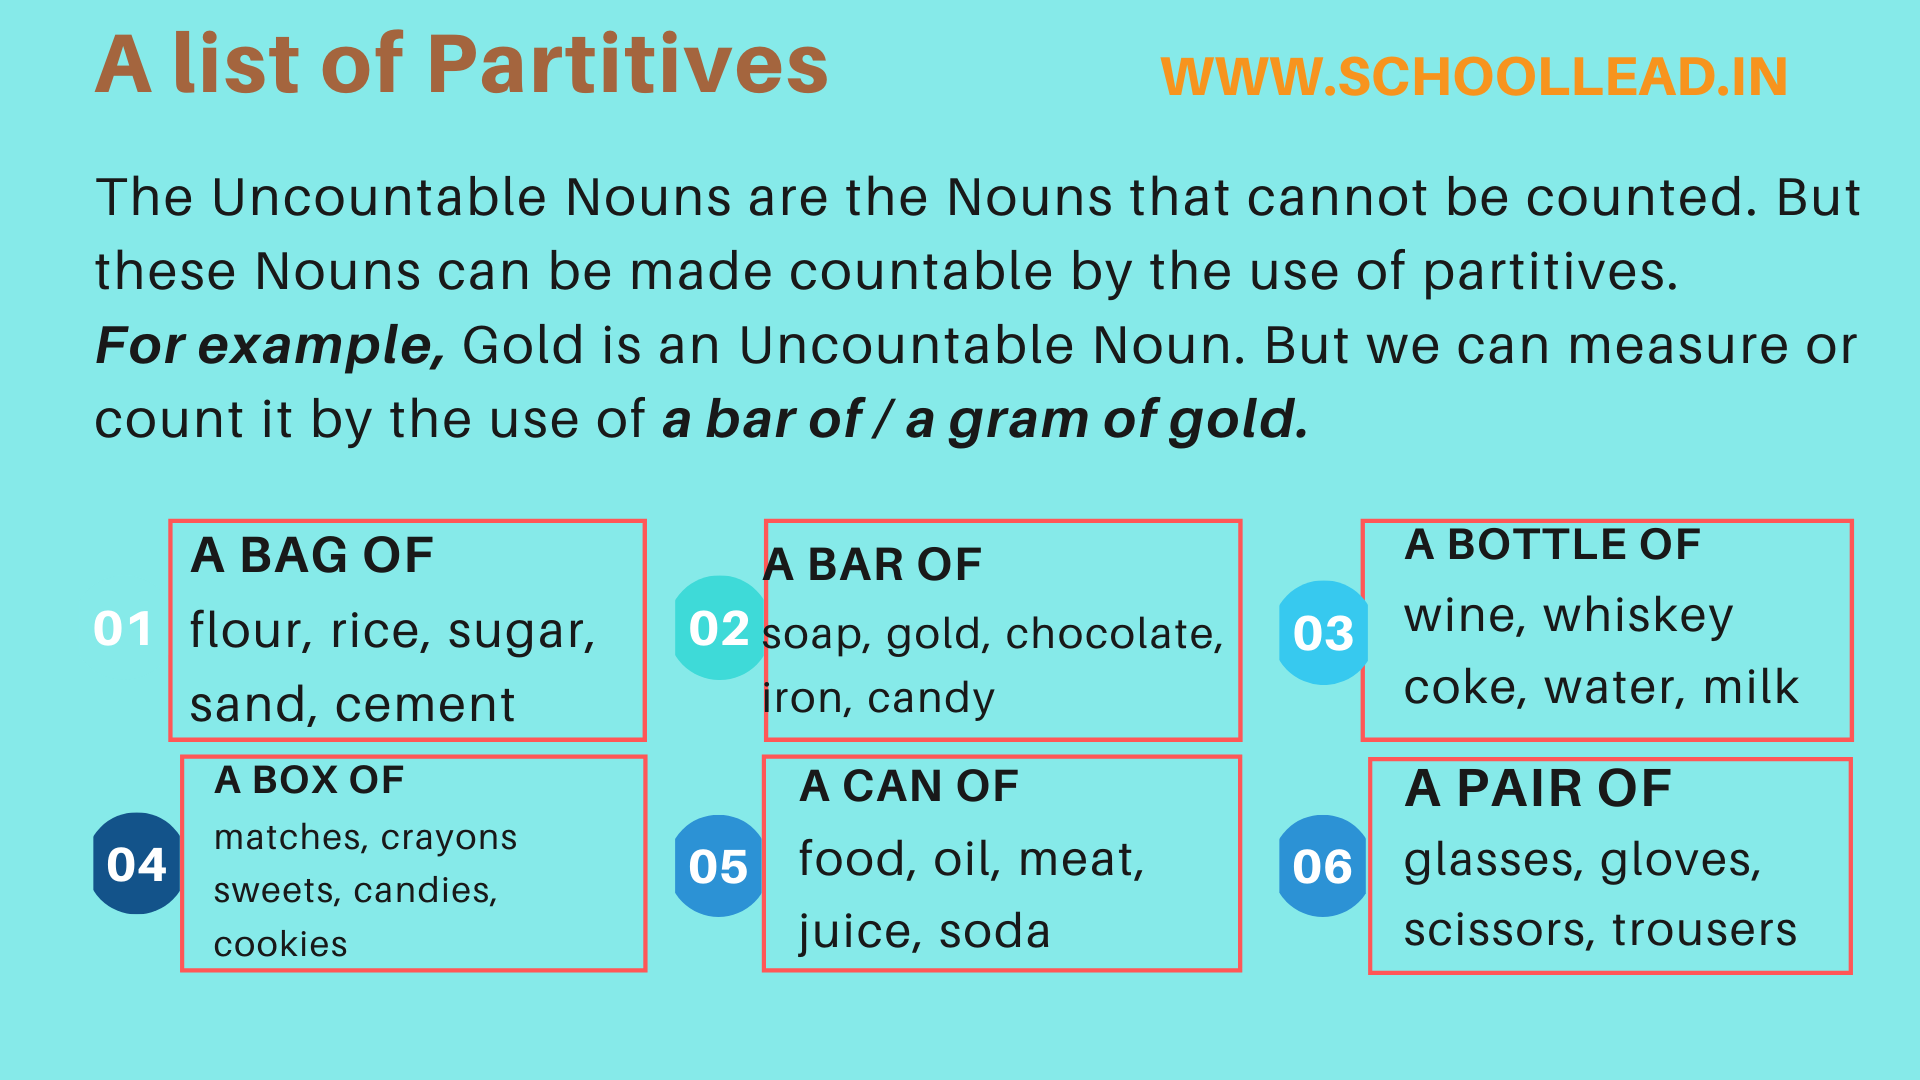 List of Partitives